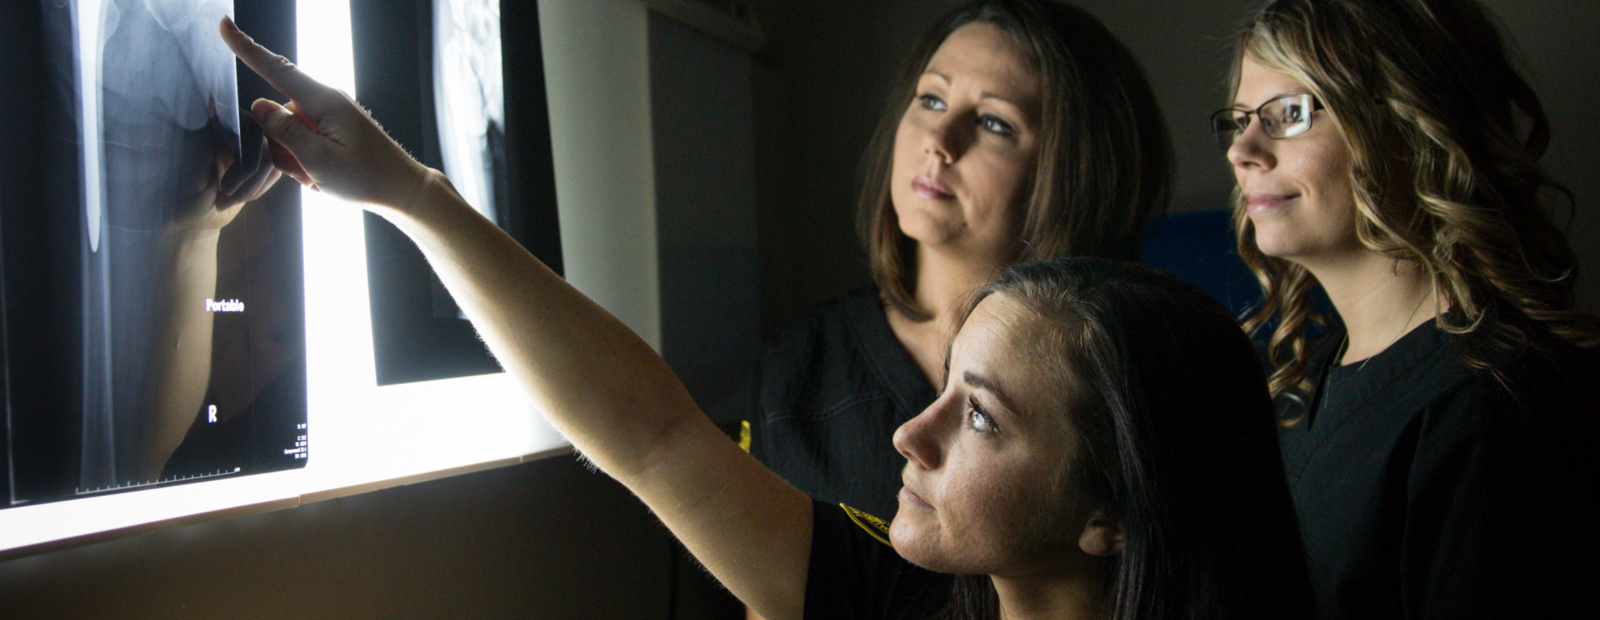 St. Clair County Community College students read X-ray images.